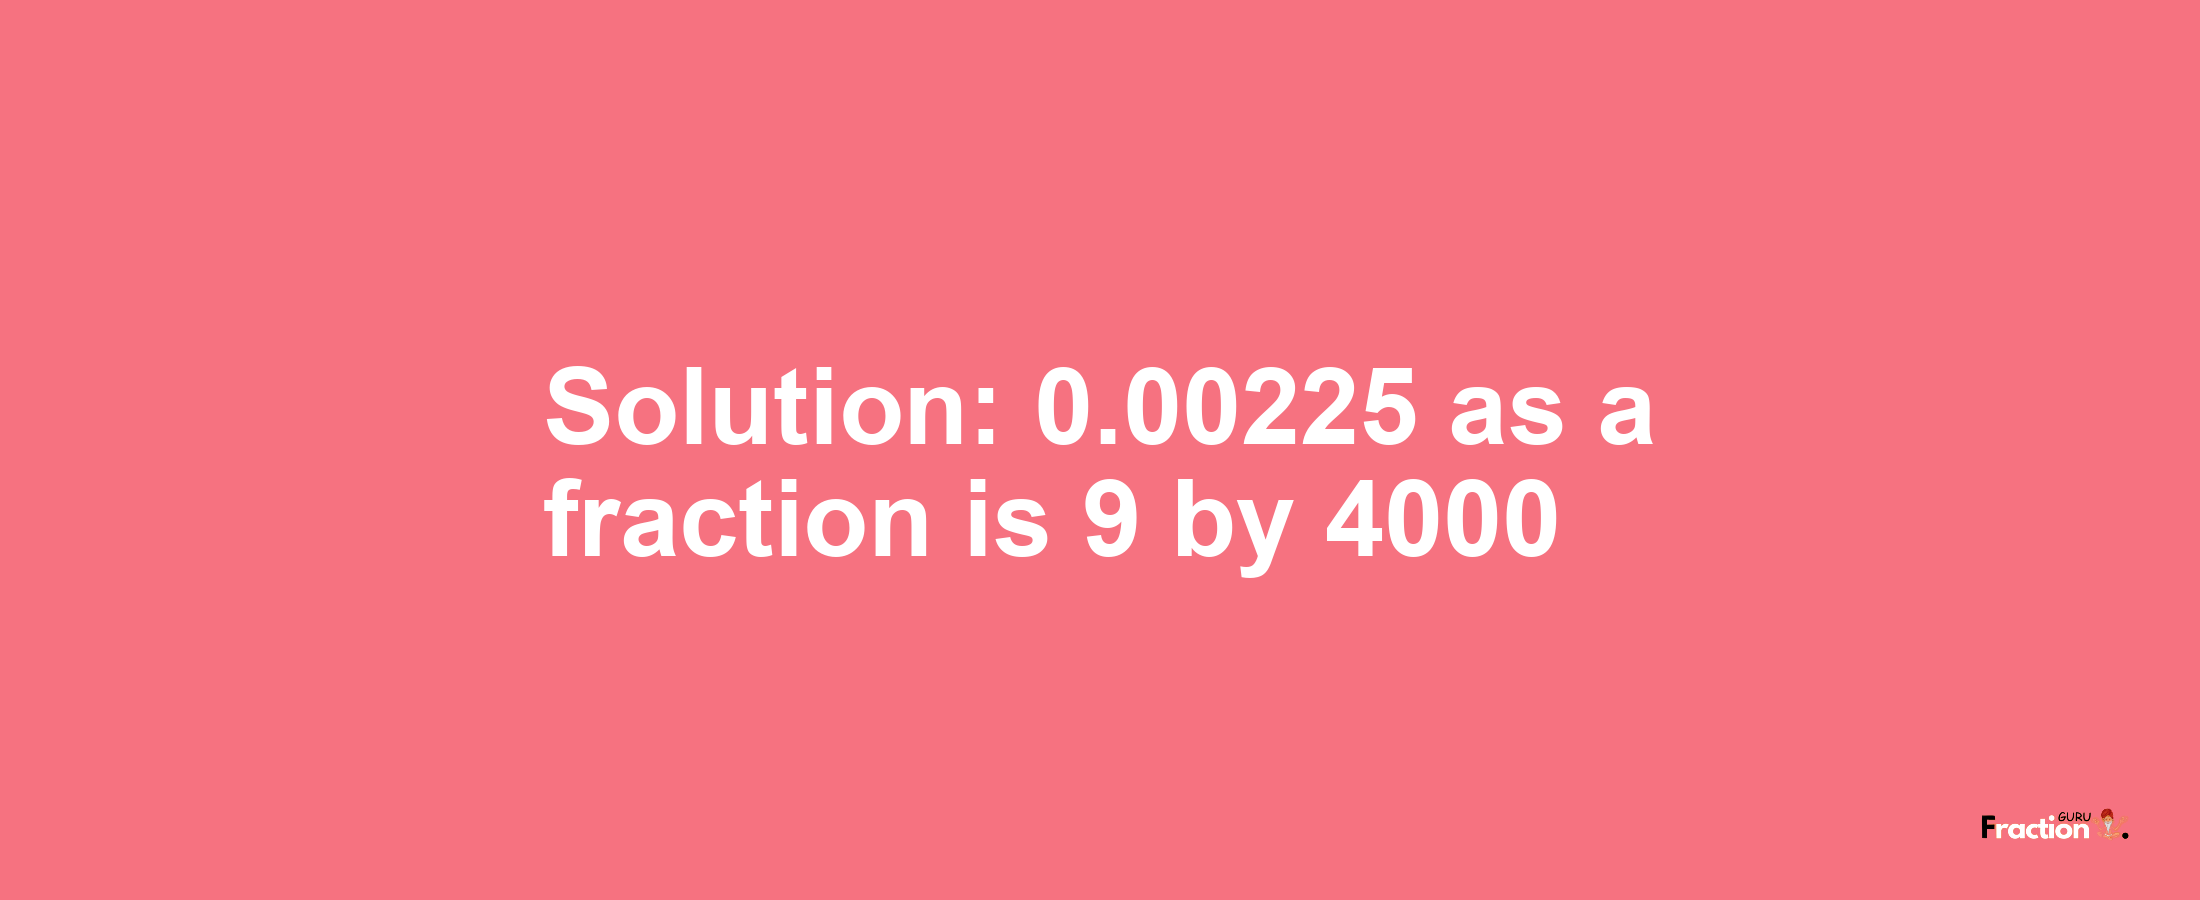 Solution:0.00225 as a fraction is 9/4000